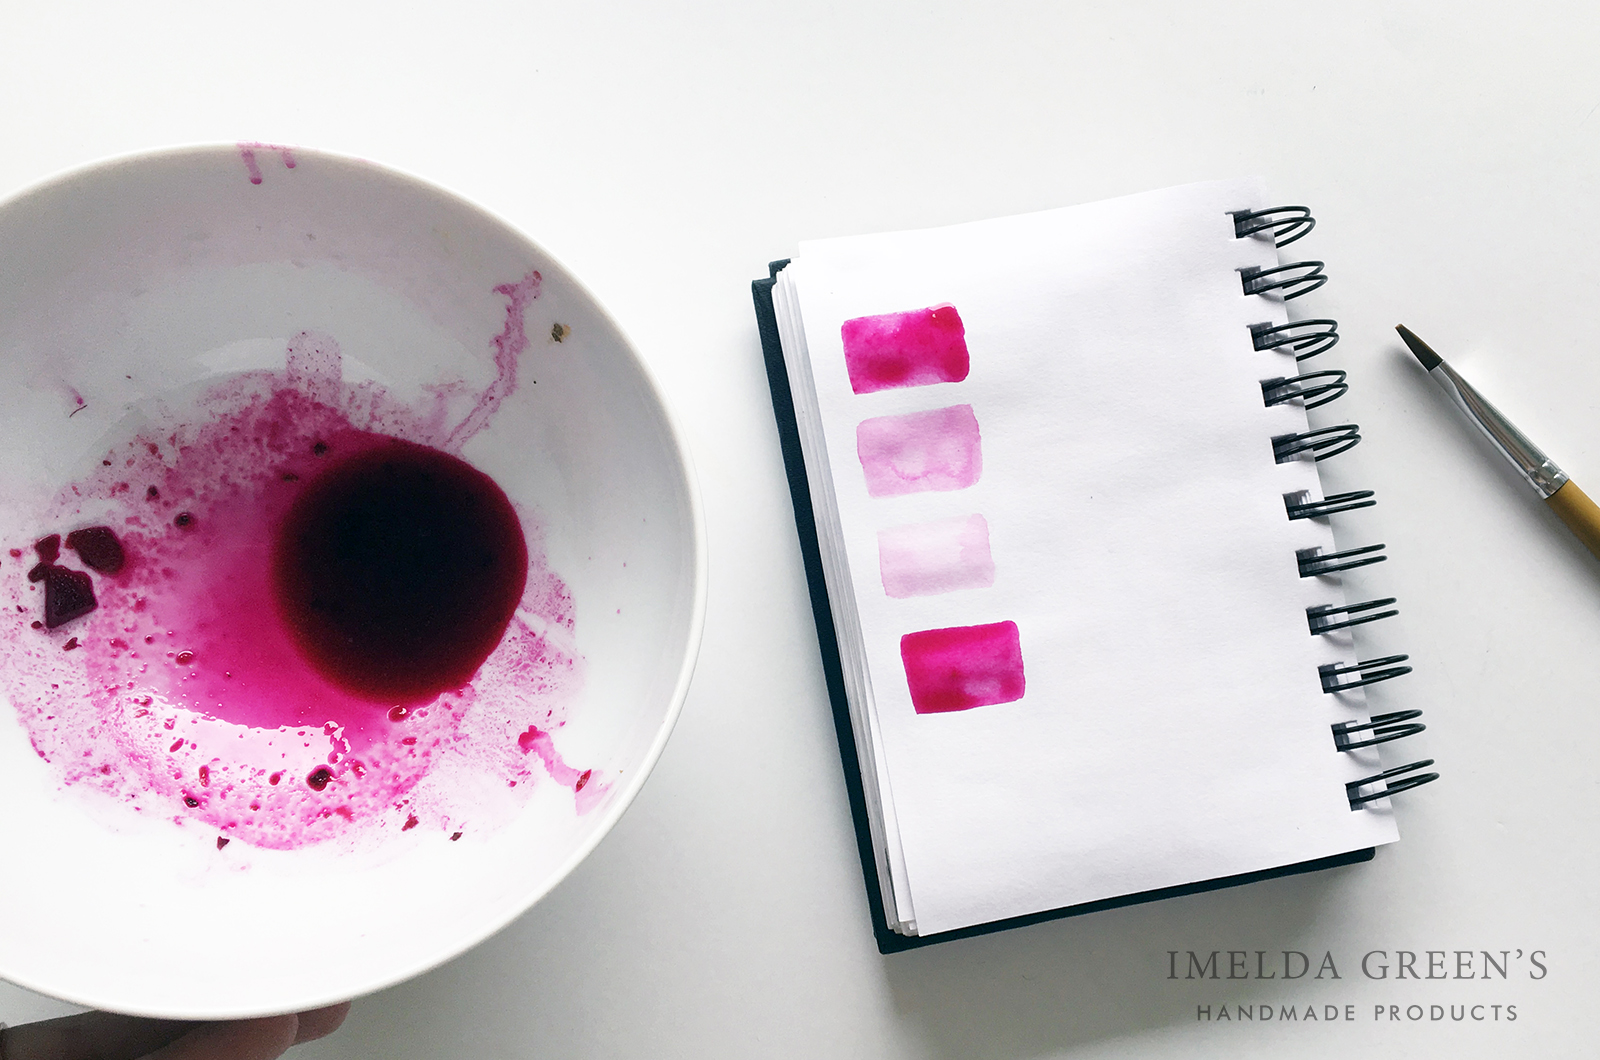 Natural paints: wine and beetroot